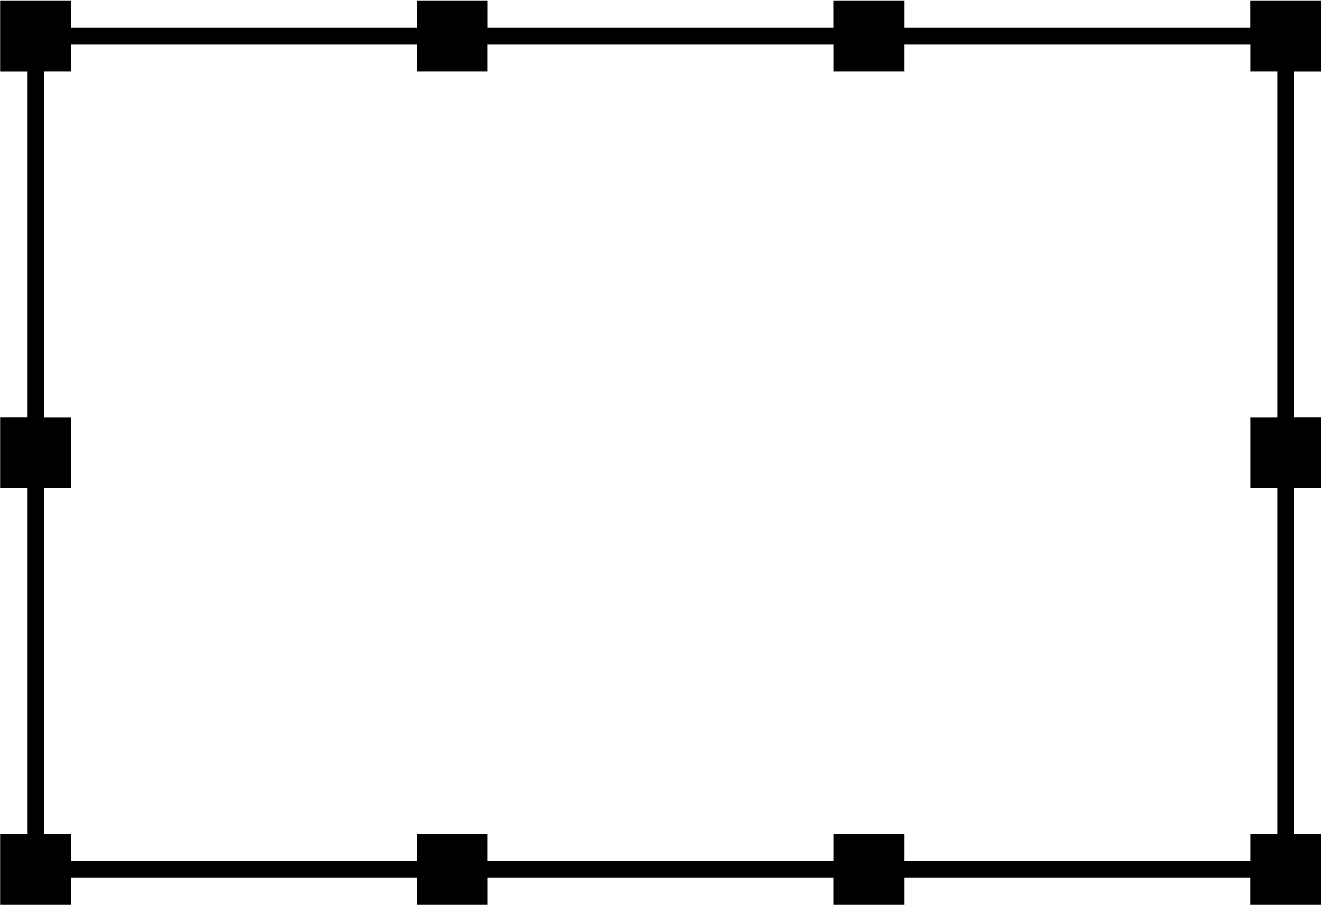 A rectangle with 10 equally spaced points marked around its perimeter with 1 point in each of the four corners. Two points on each of the longer sides divide these sides into three equal segments. One point on each of the shorter sides divides these sides into two equal segments.